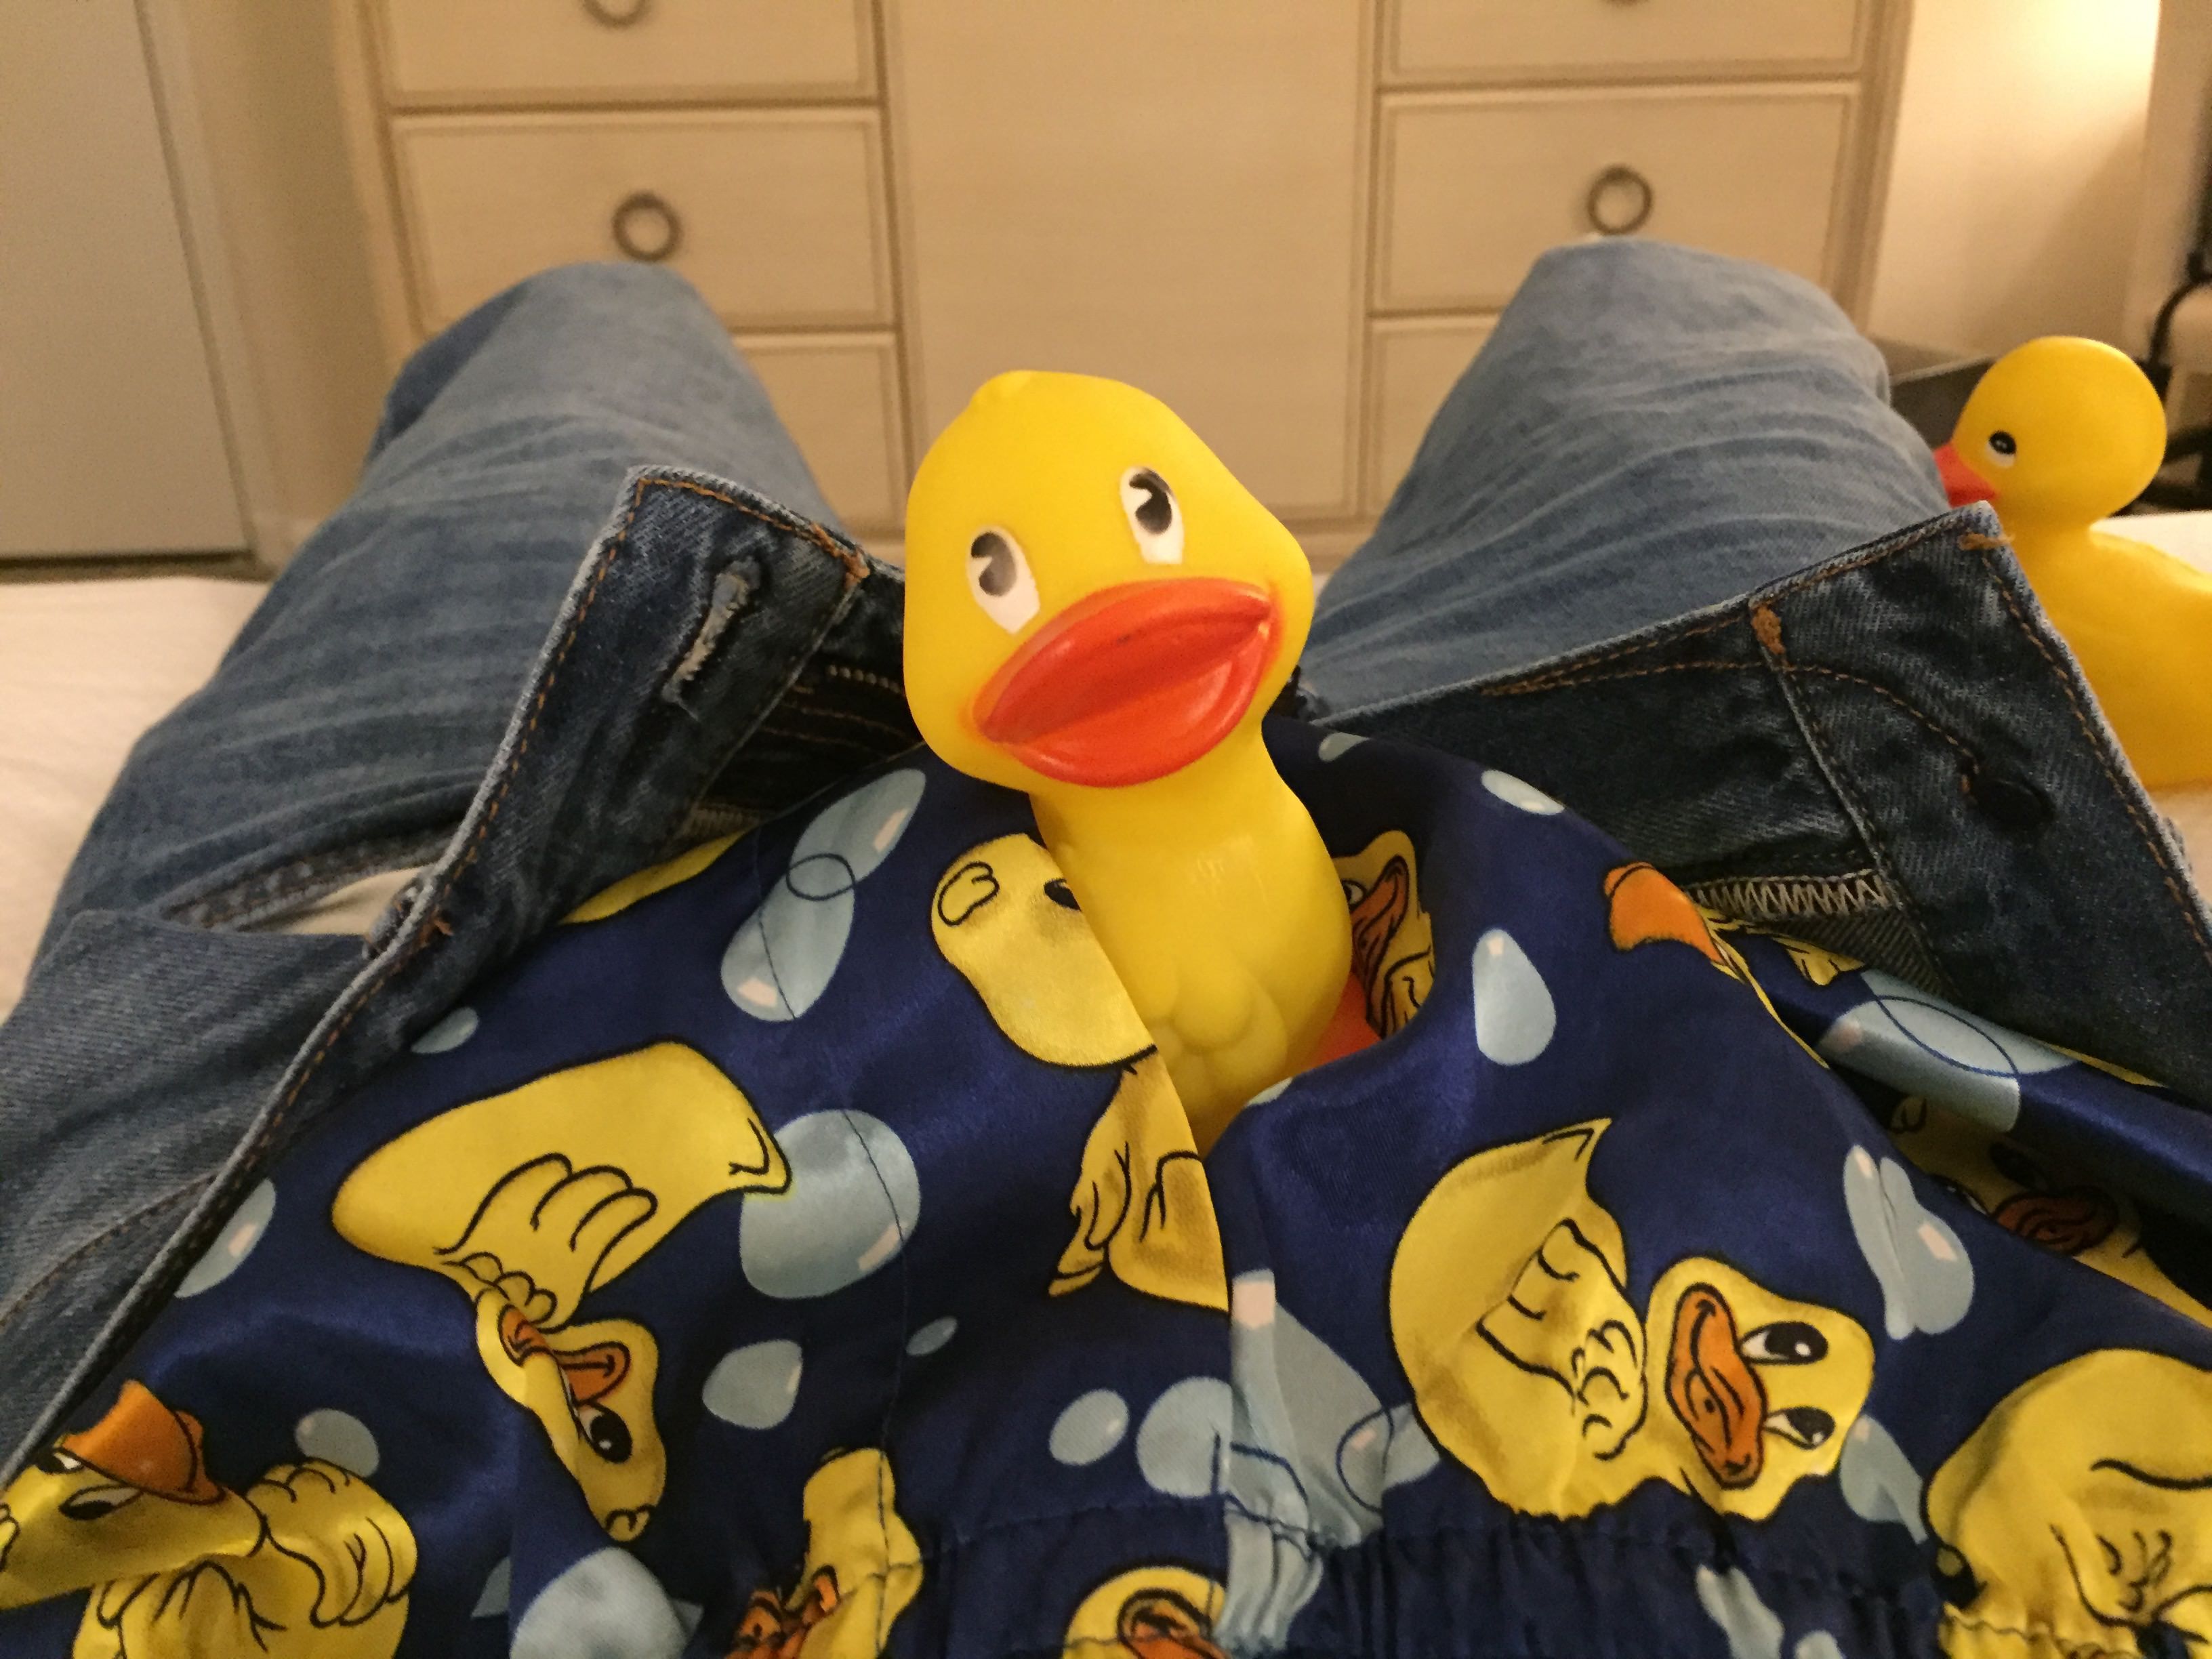 Girlfriend was curious about my new underwear, so I sent her a duck pic